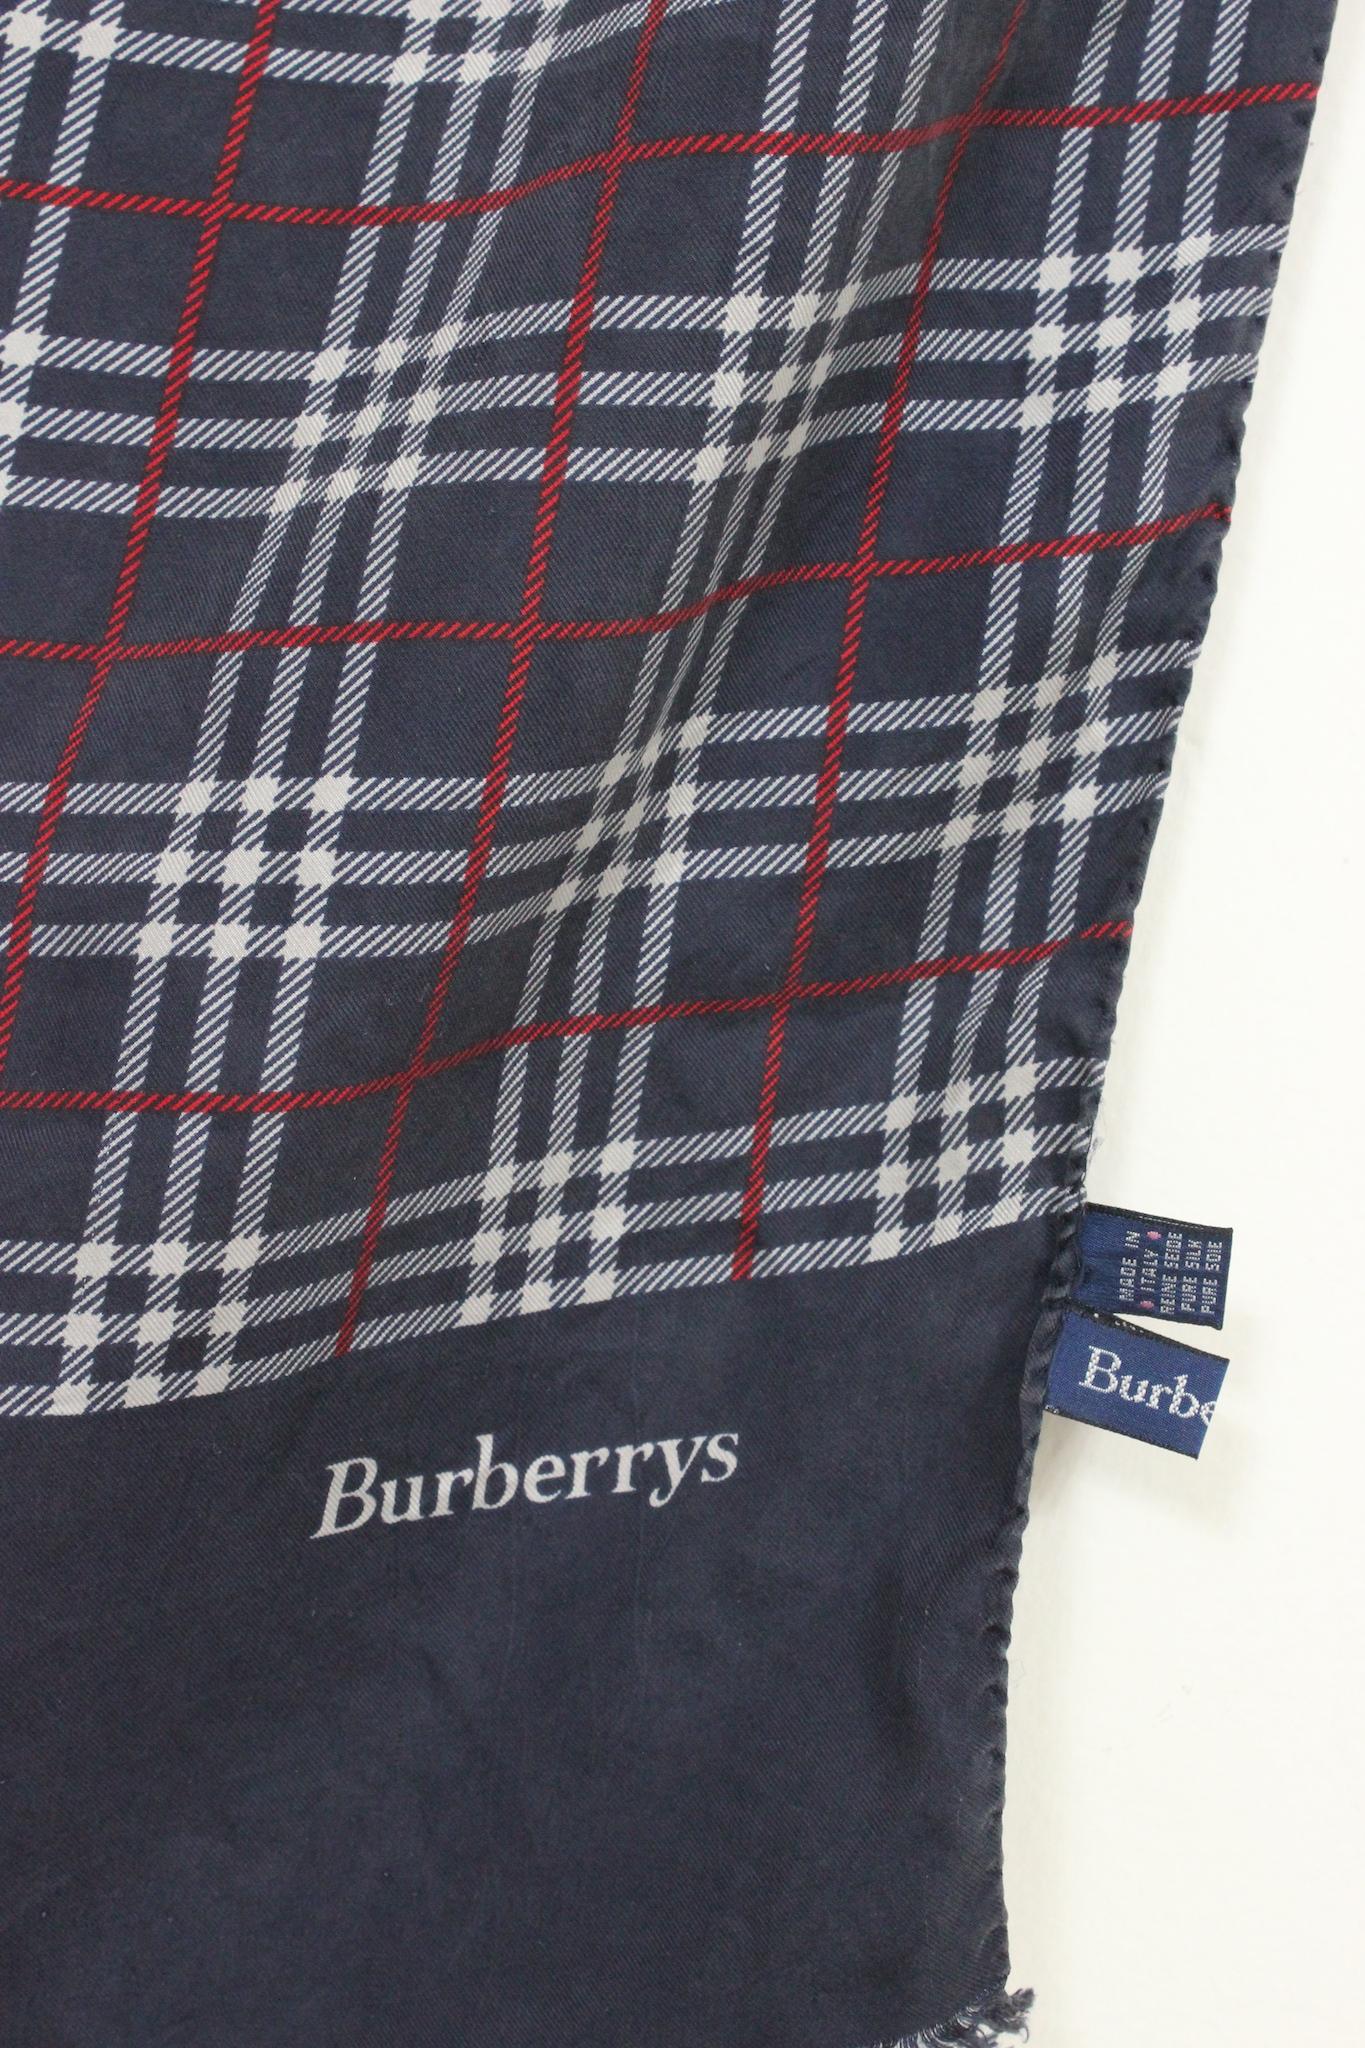 This vintage Burberry silk scarf features the classic blue, white and red check fantasy in an iconic 80s style. The luxurious fabric and timeless design are sure to make a statement!

Measures: 142 x 47 cm